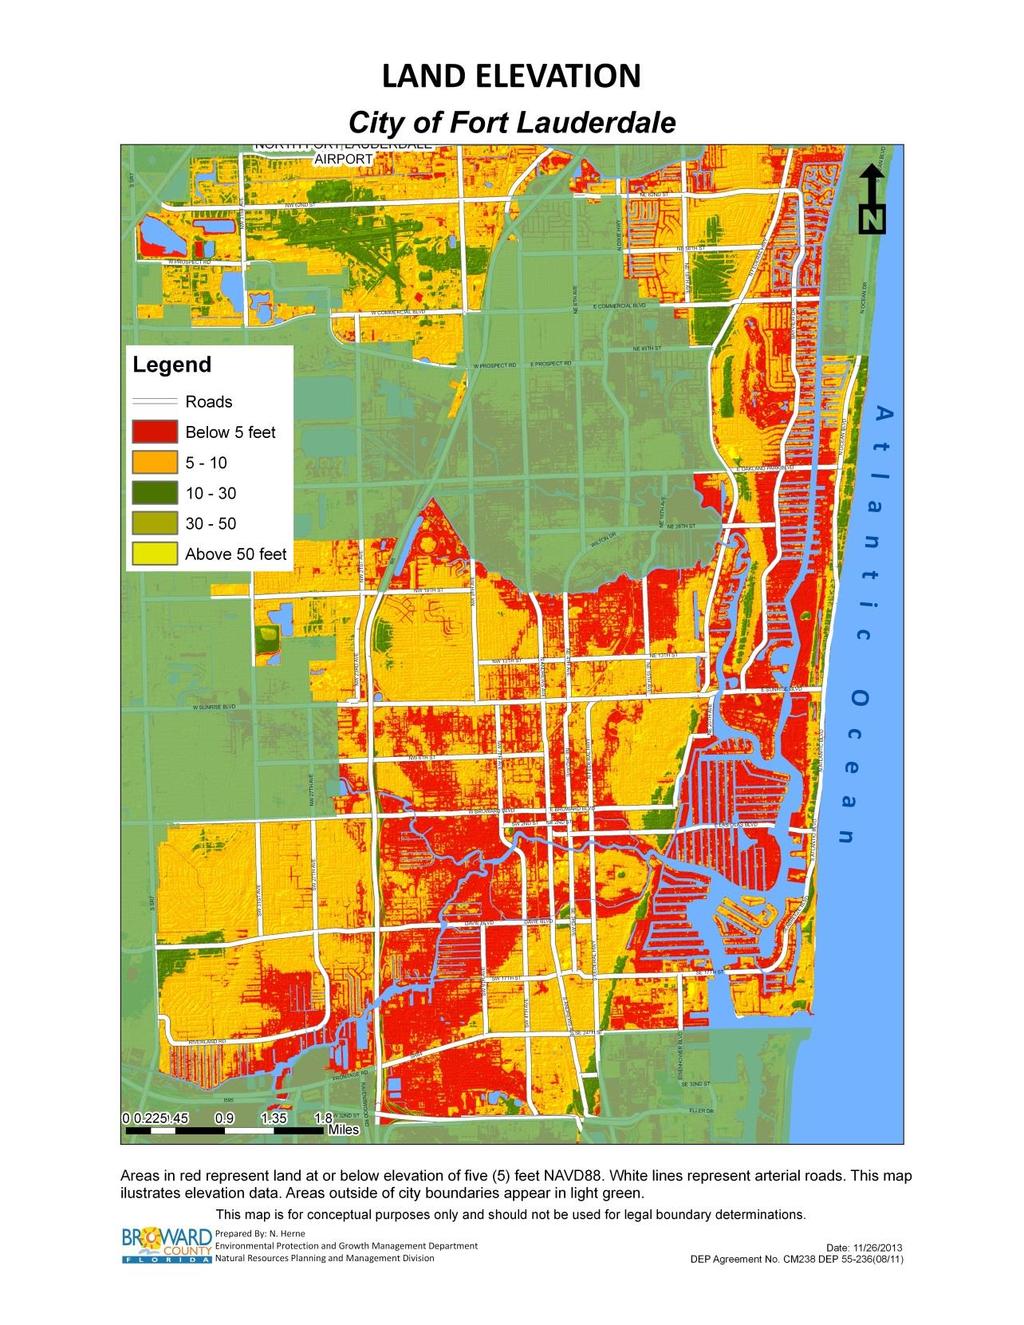 City of Fort Lauderdale Land Elevation Map * Red represents areas